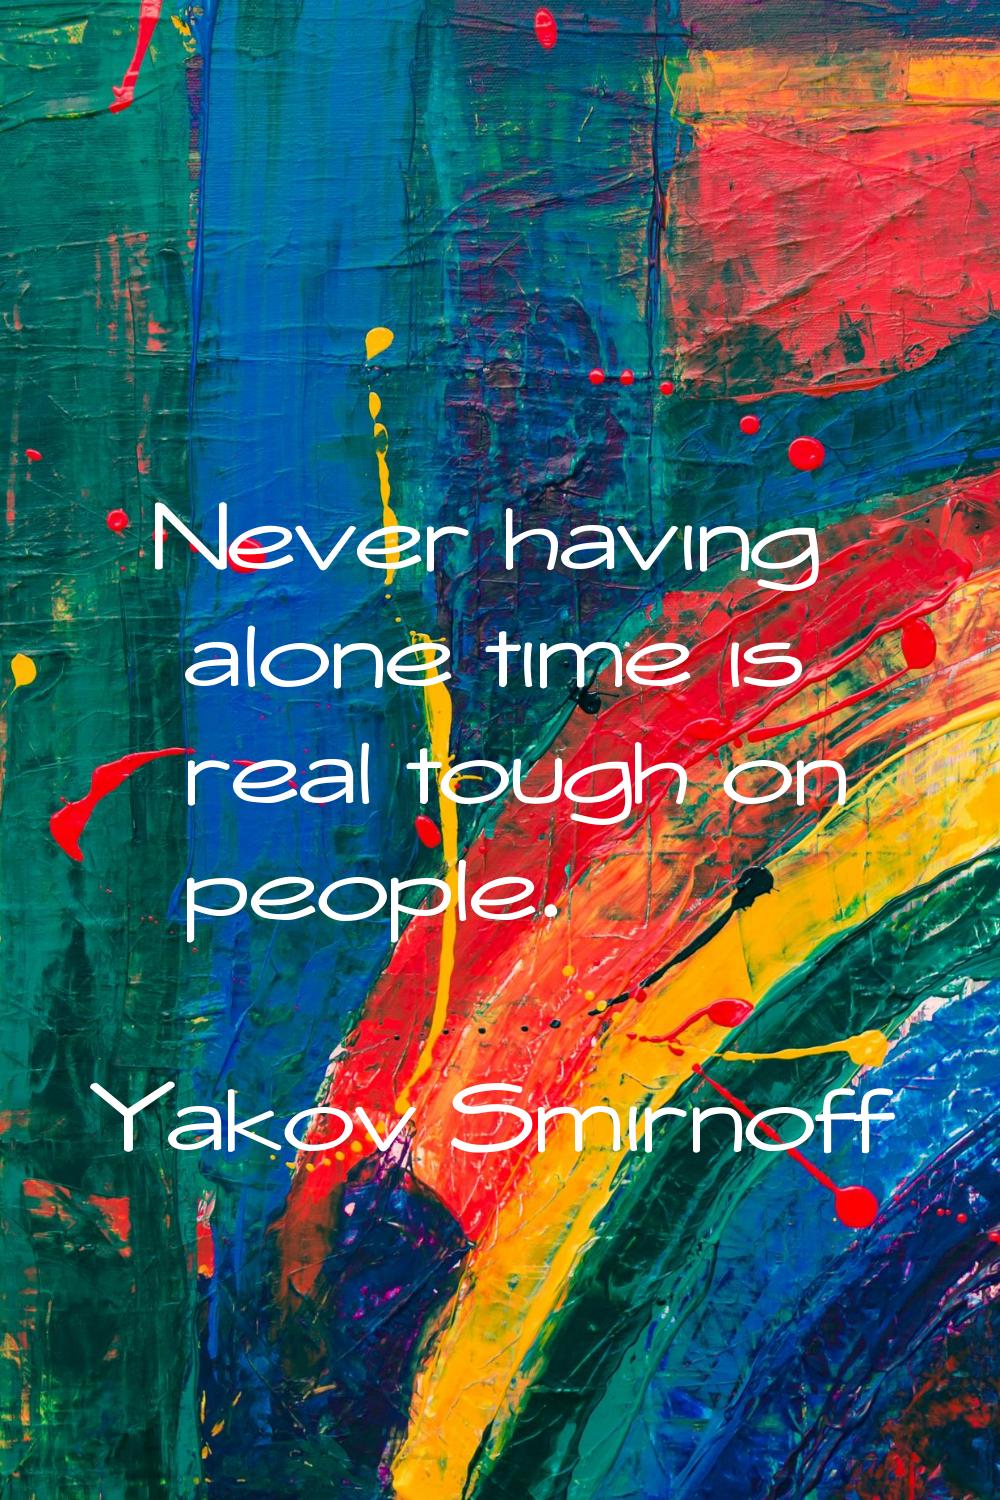 Never having alone time is real tough on people.